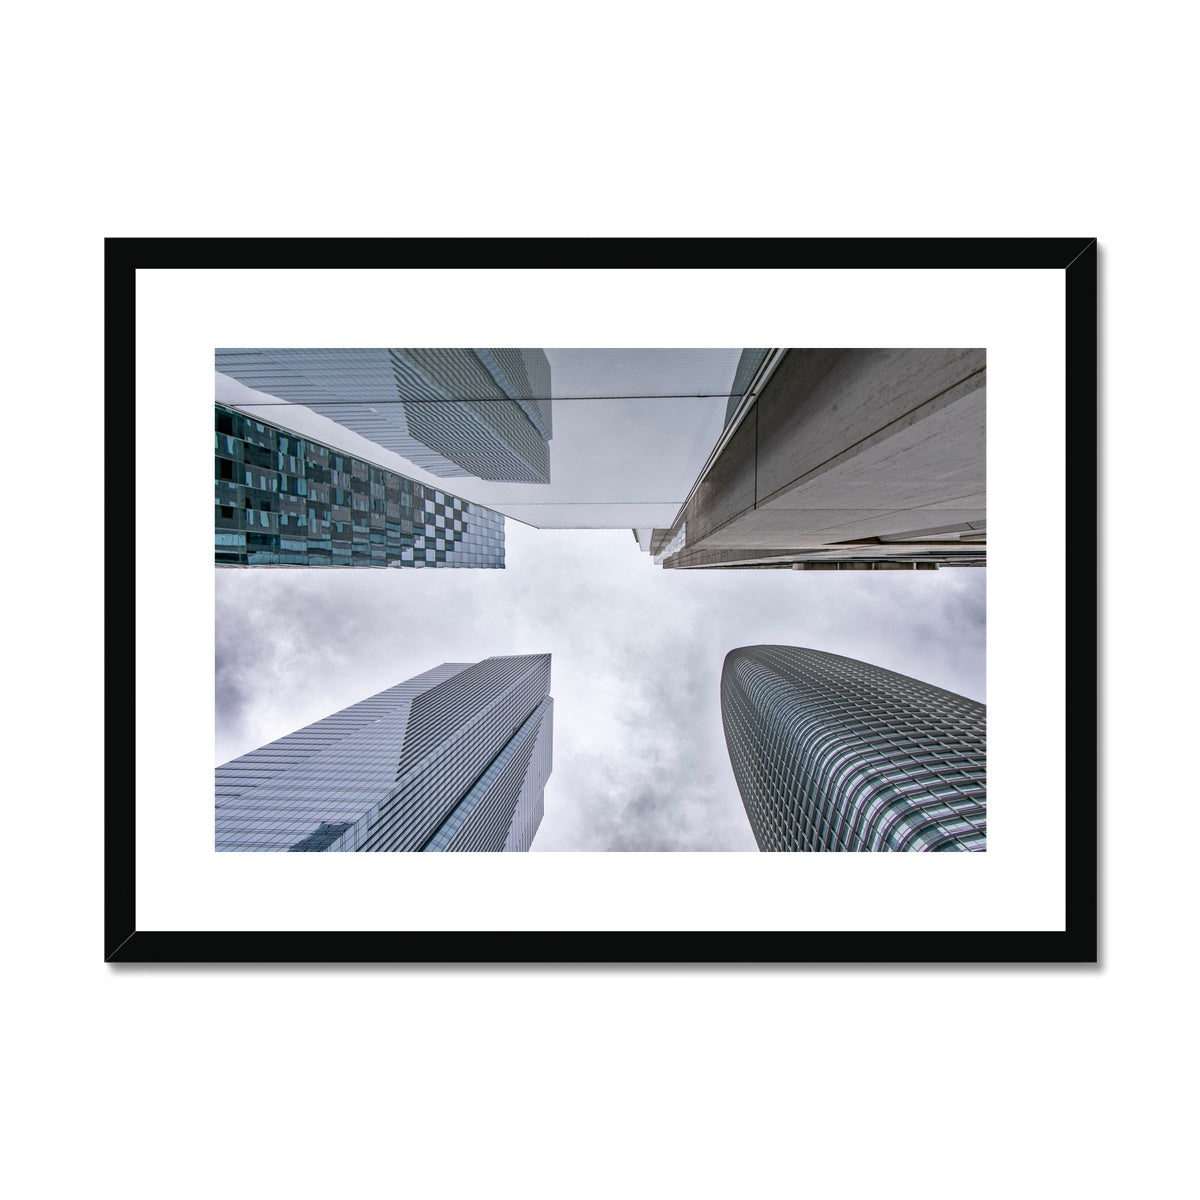 The towers Framed & Mounted Print